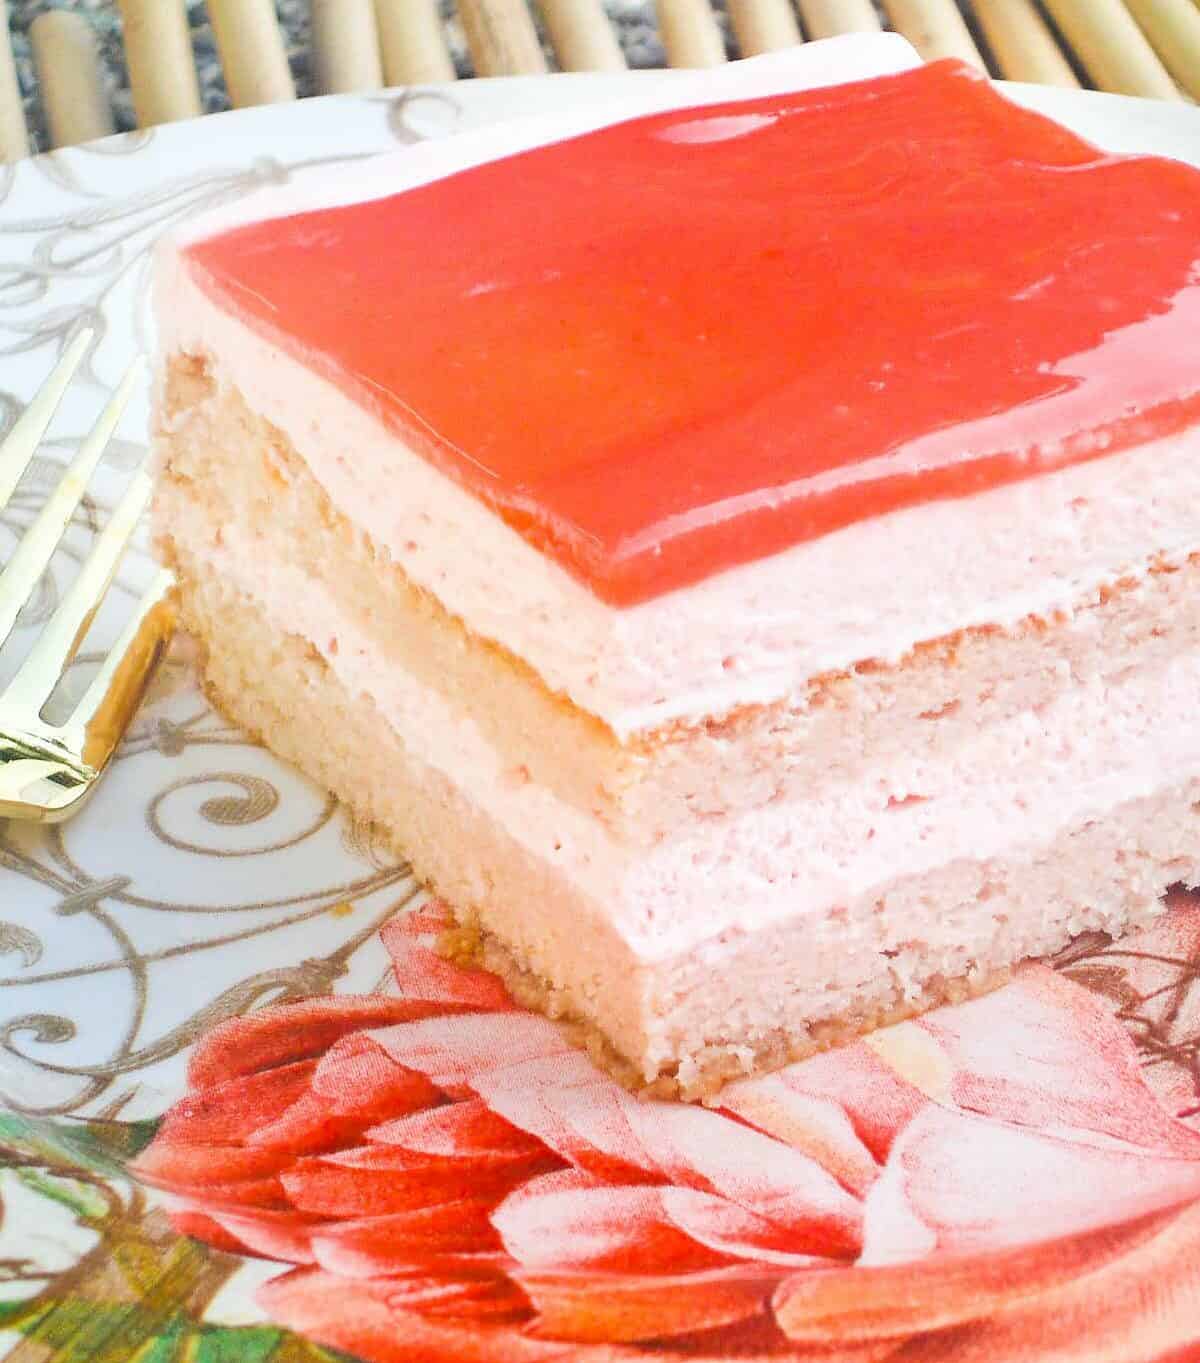  A slice of sweet and airy guava chiffon cake.